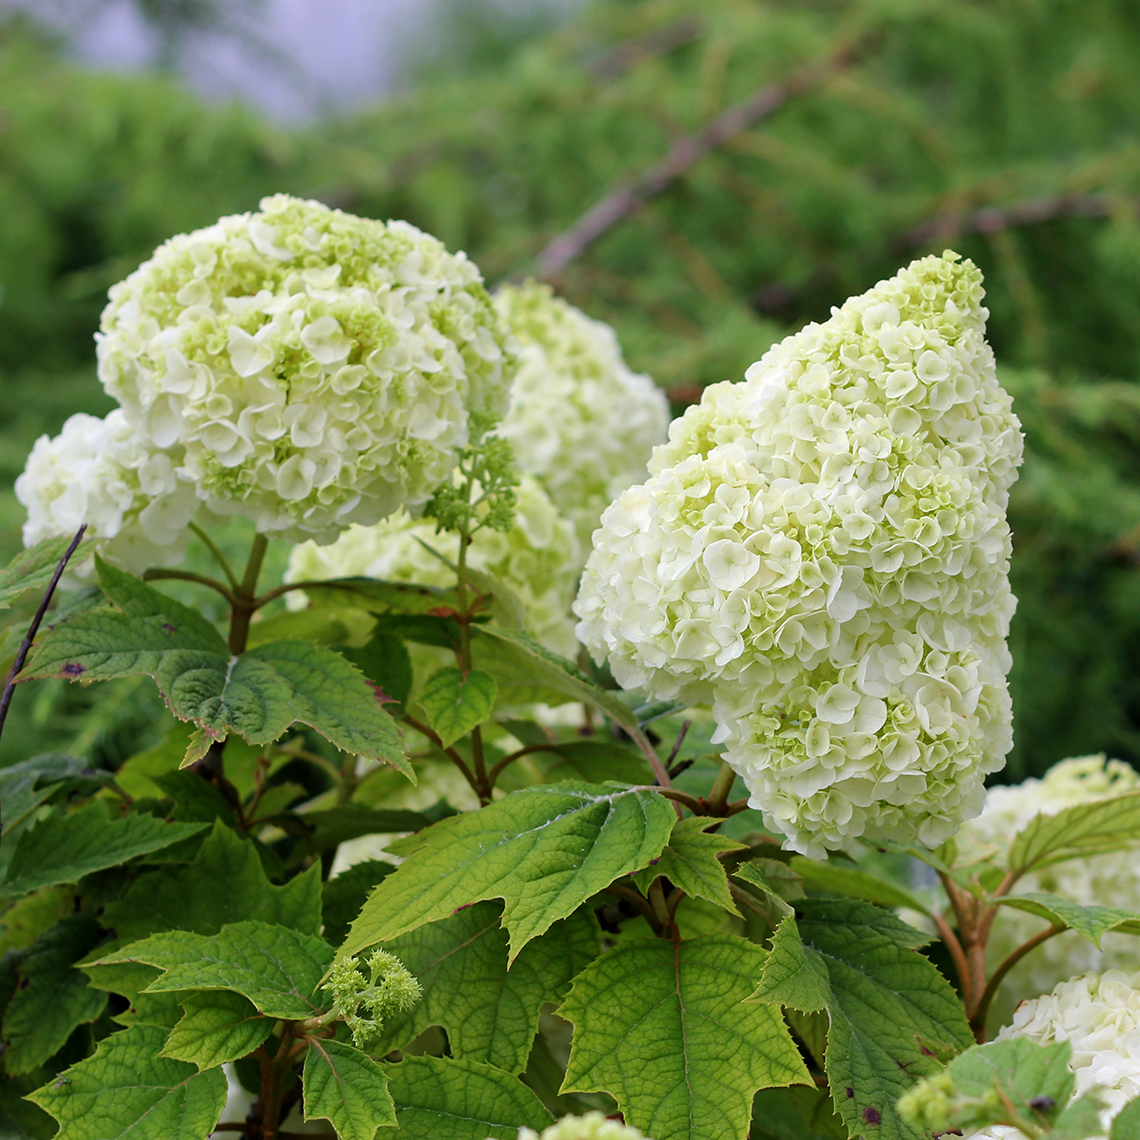 Gatsby Moon oakleaf hydrangea flaunting its large fluffy white mophead blooms in the landscape